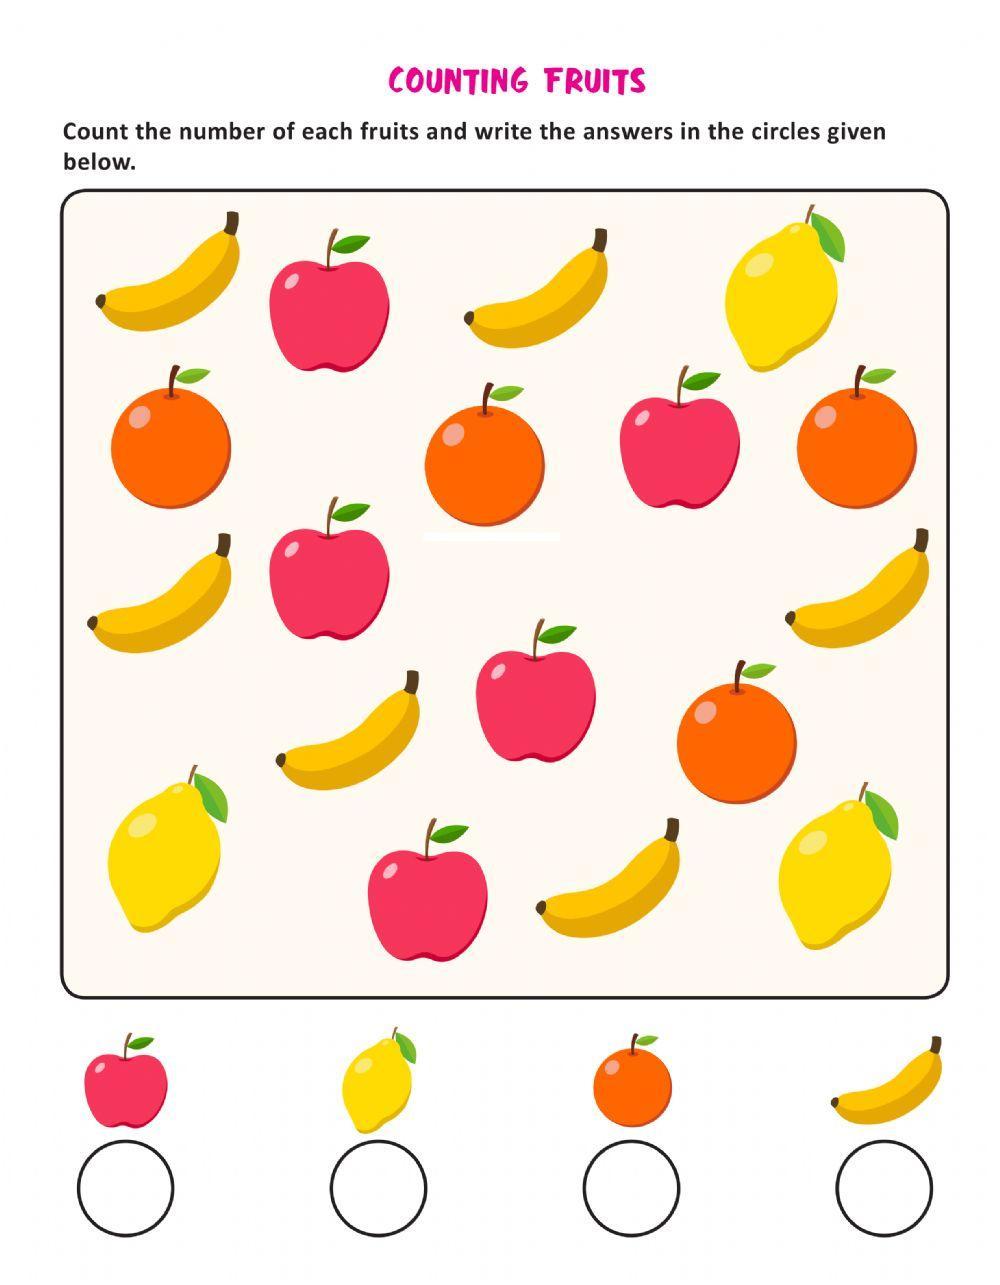 Counting fruit